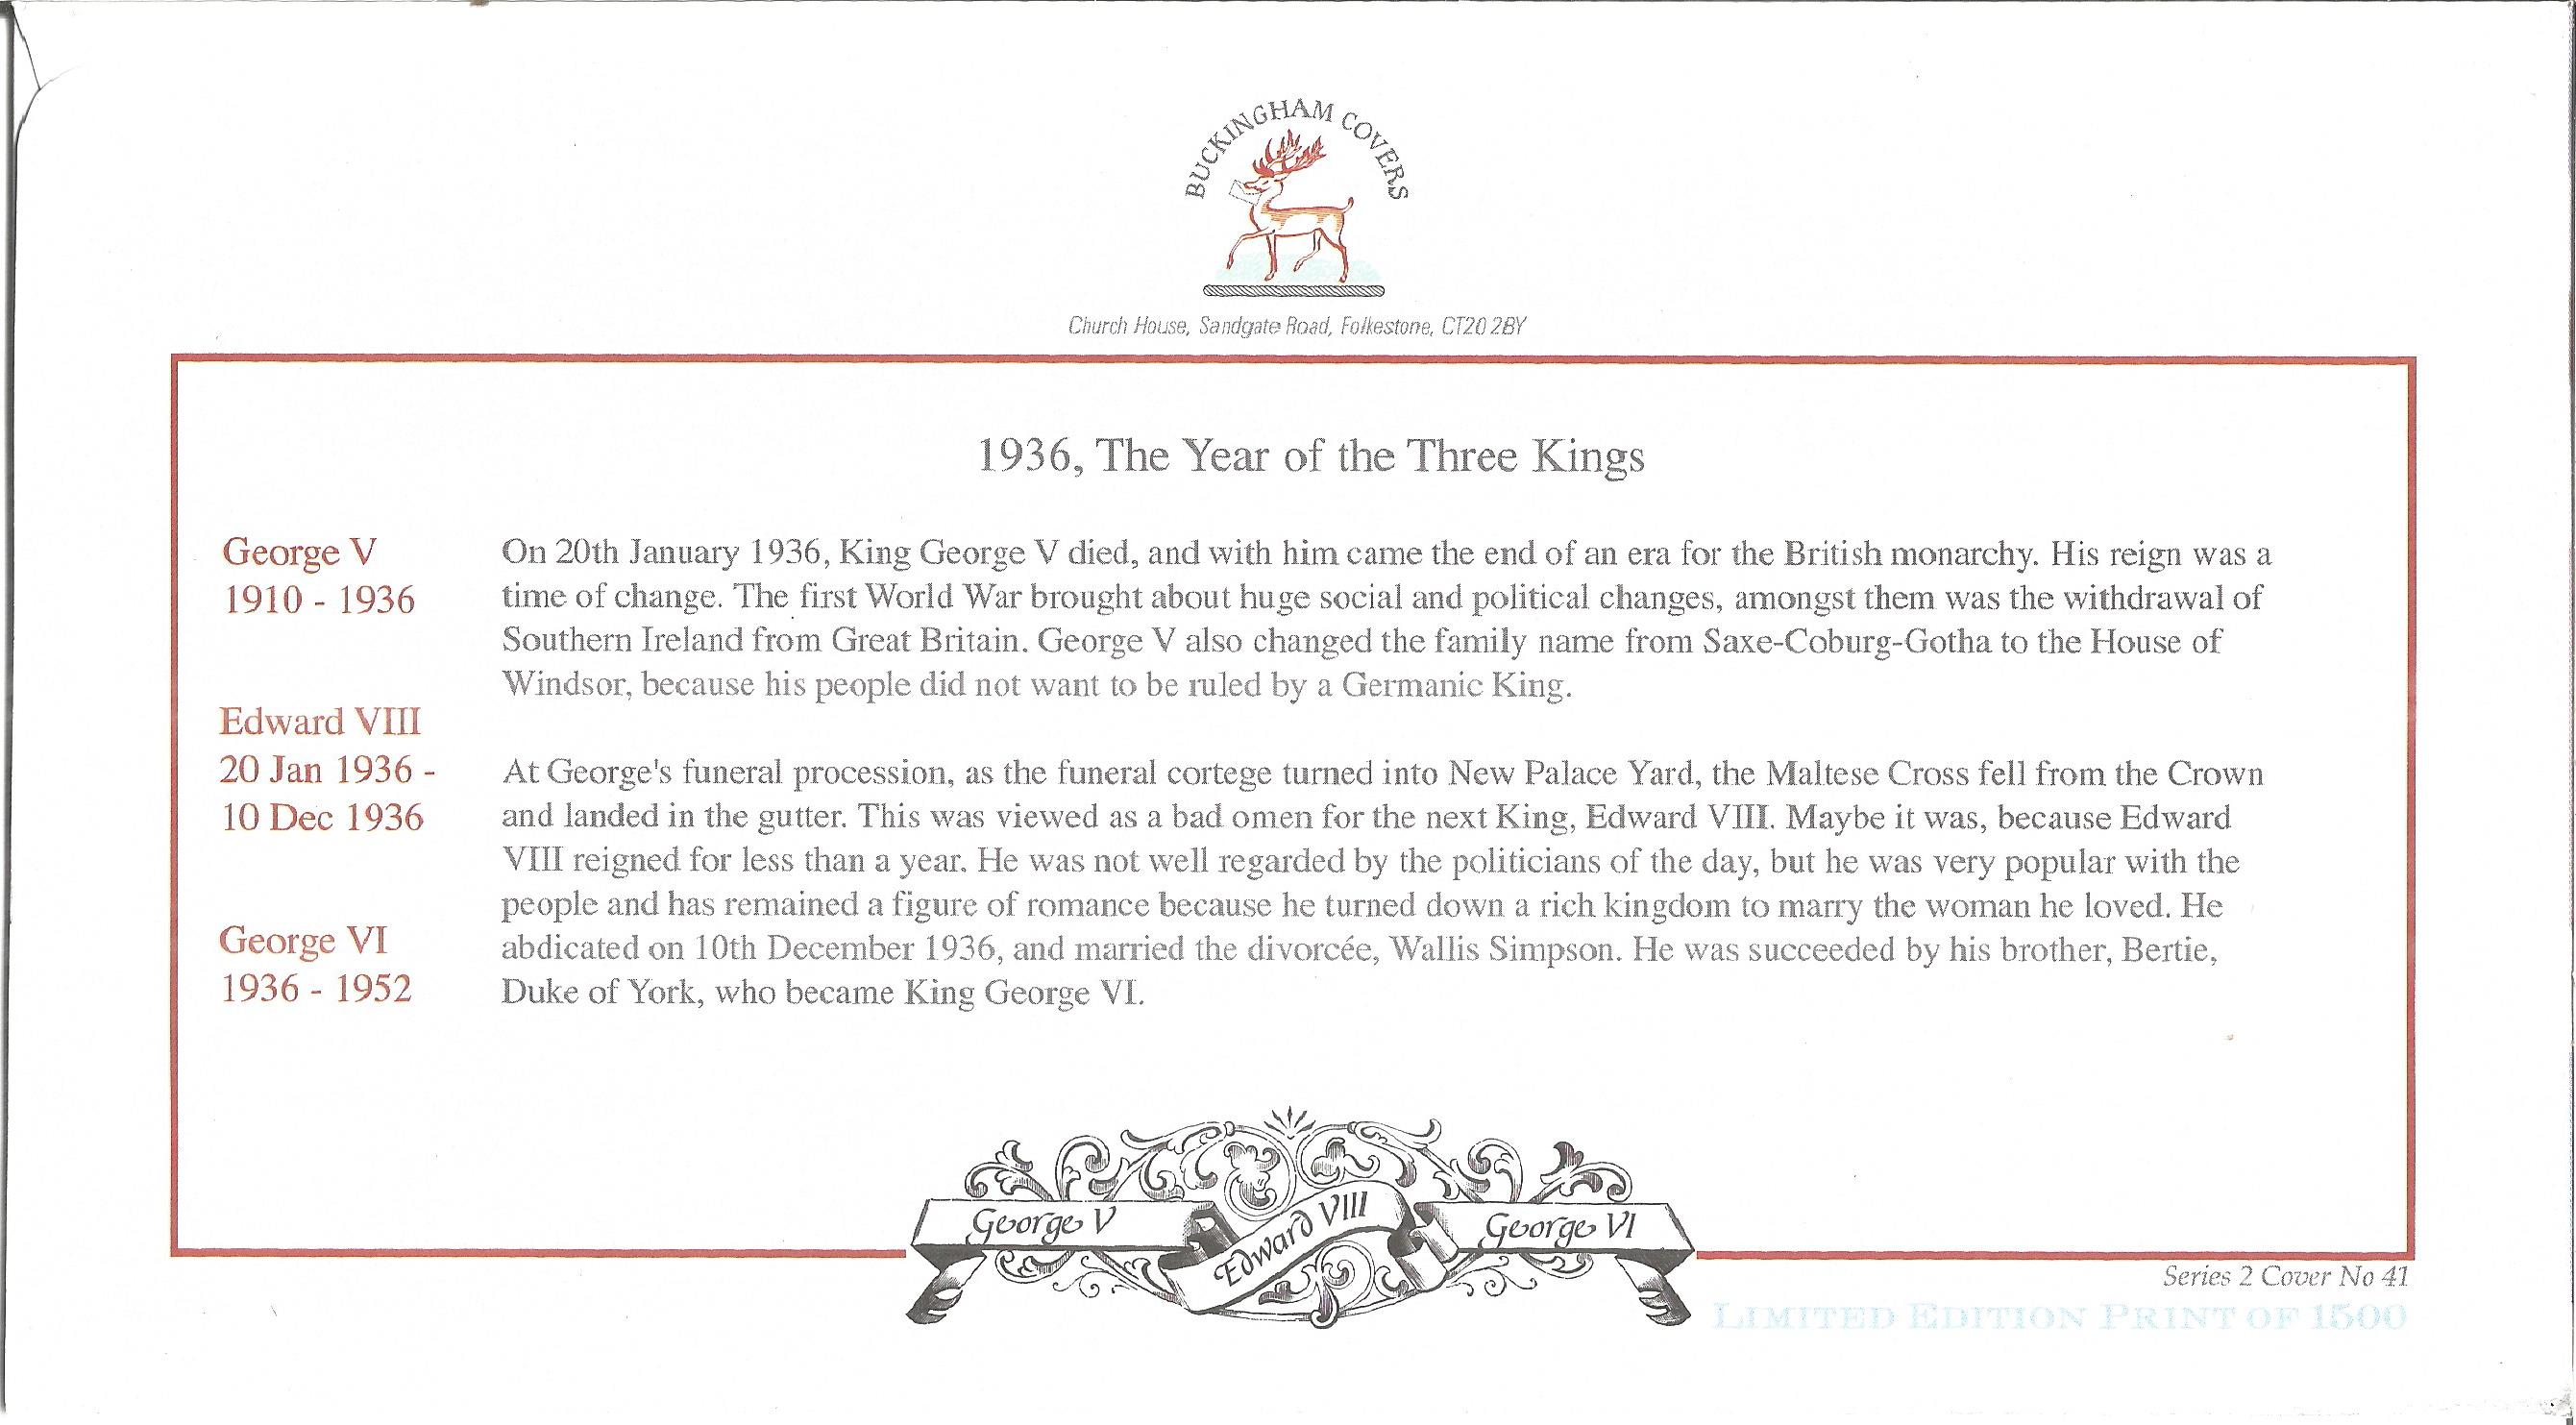 1936 The Year of the Three Kings unsigned Internetstamps official FDC series 2 cover No 41. Date - Image 2 of 2